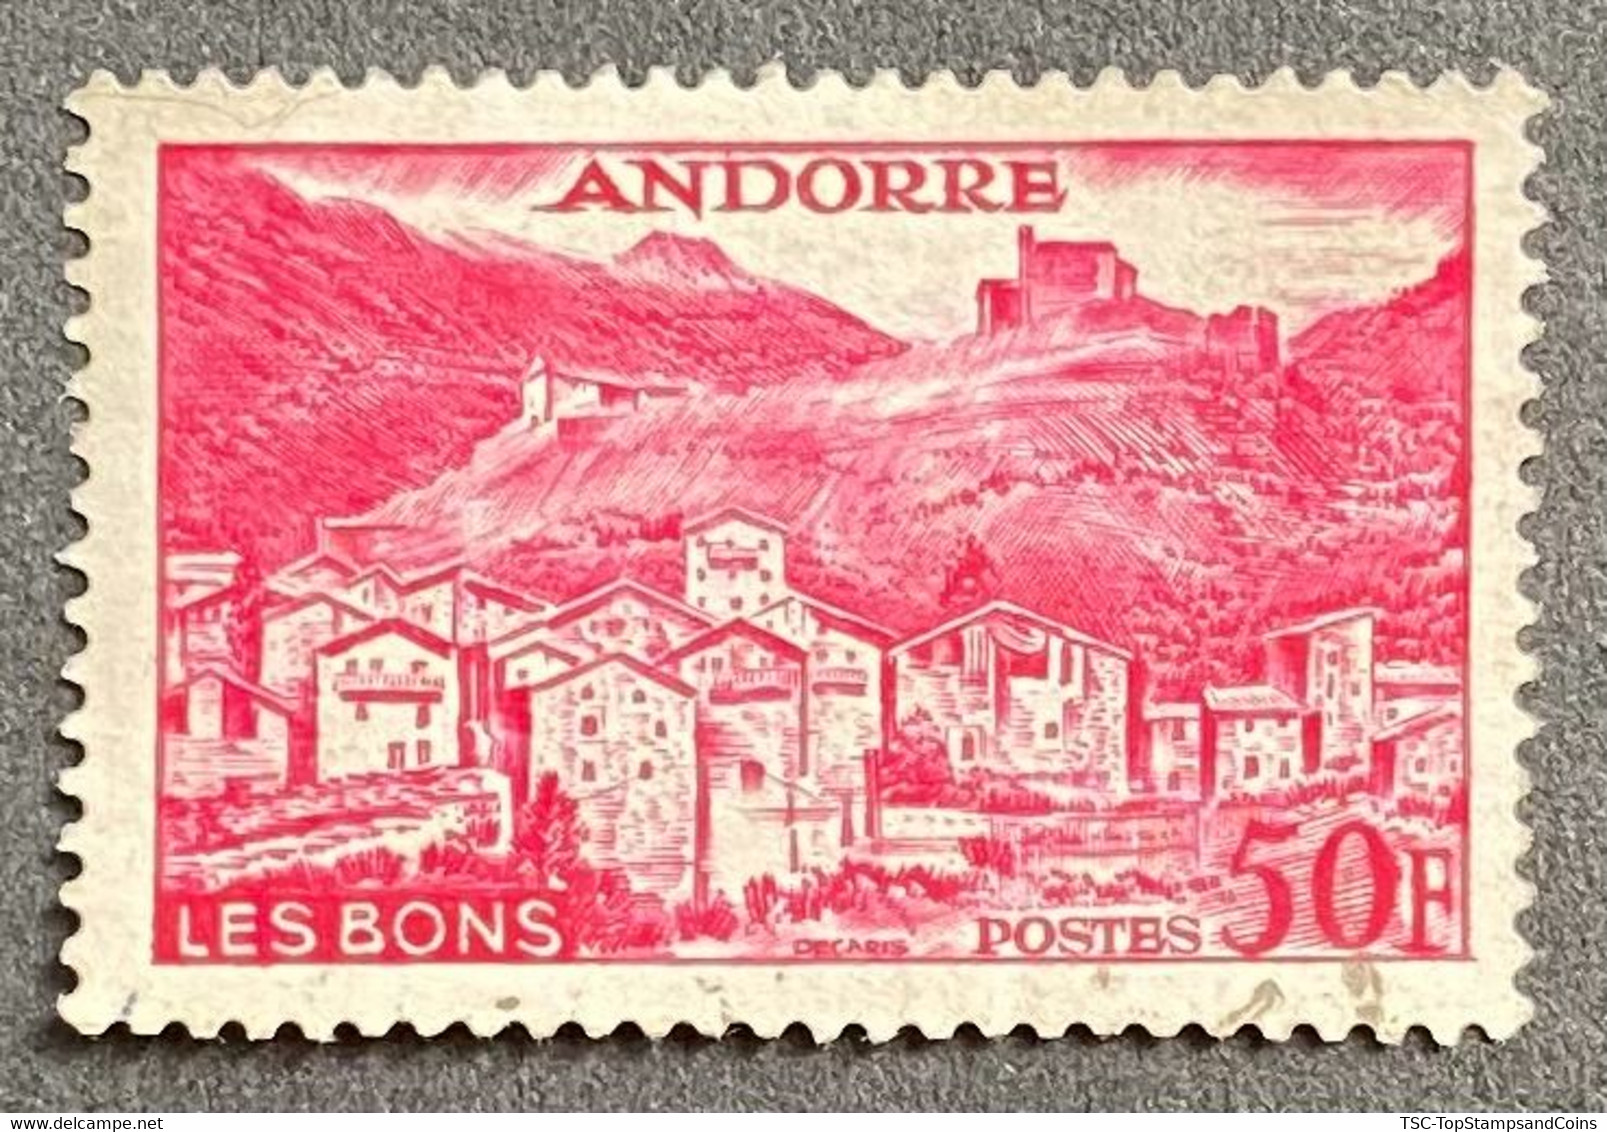 ADFR0152U - Paysages De La Principauté - 50 F Used Stamp - French Andorra - 1955 - Used Stamps